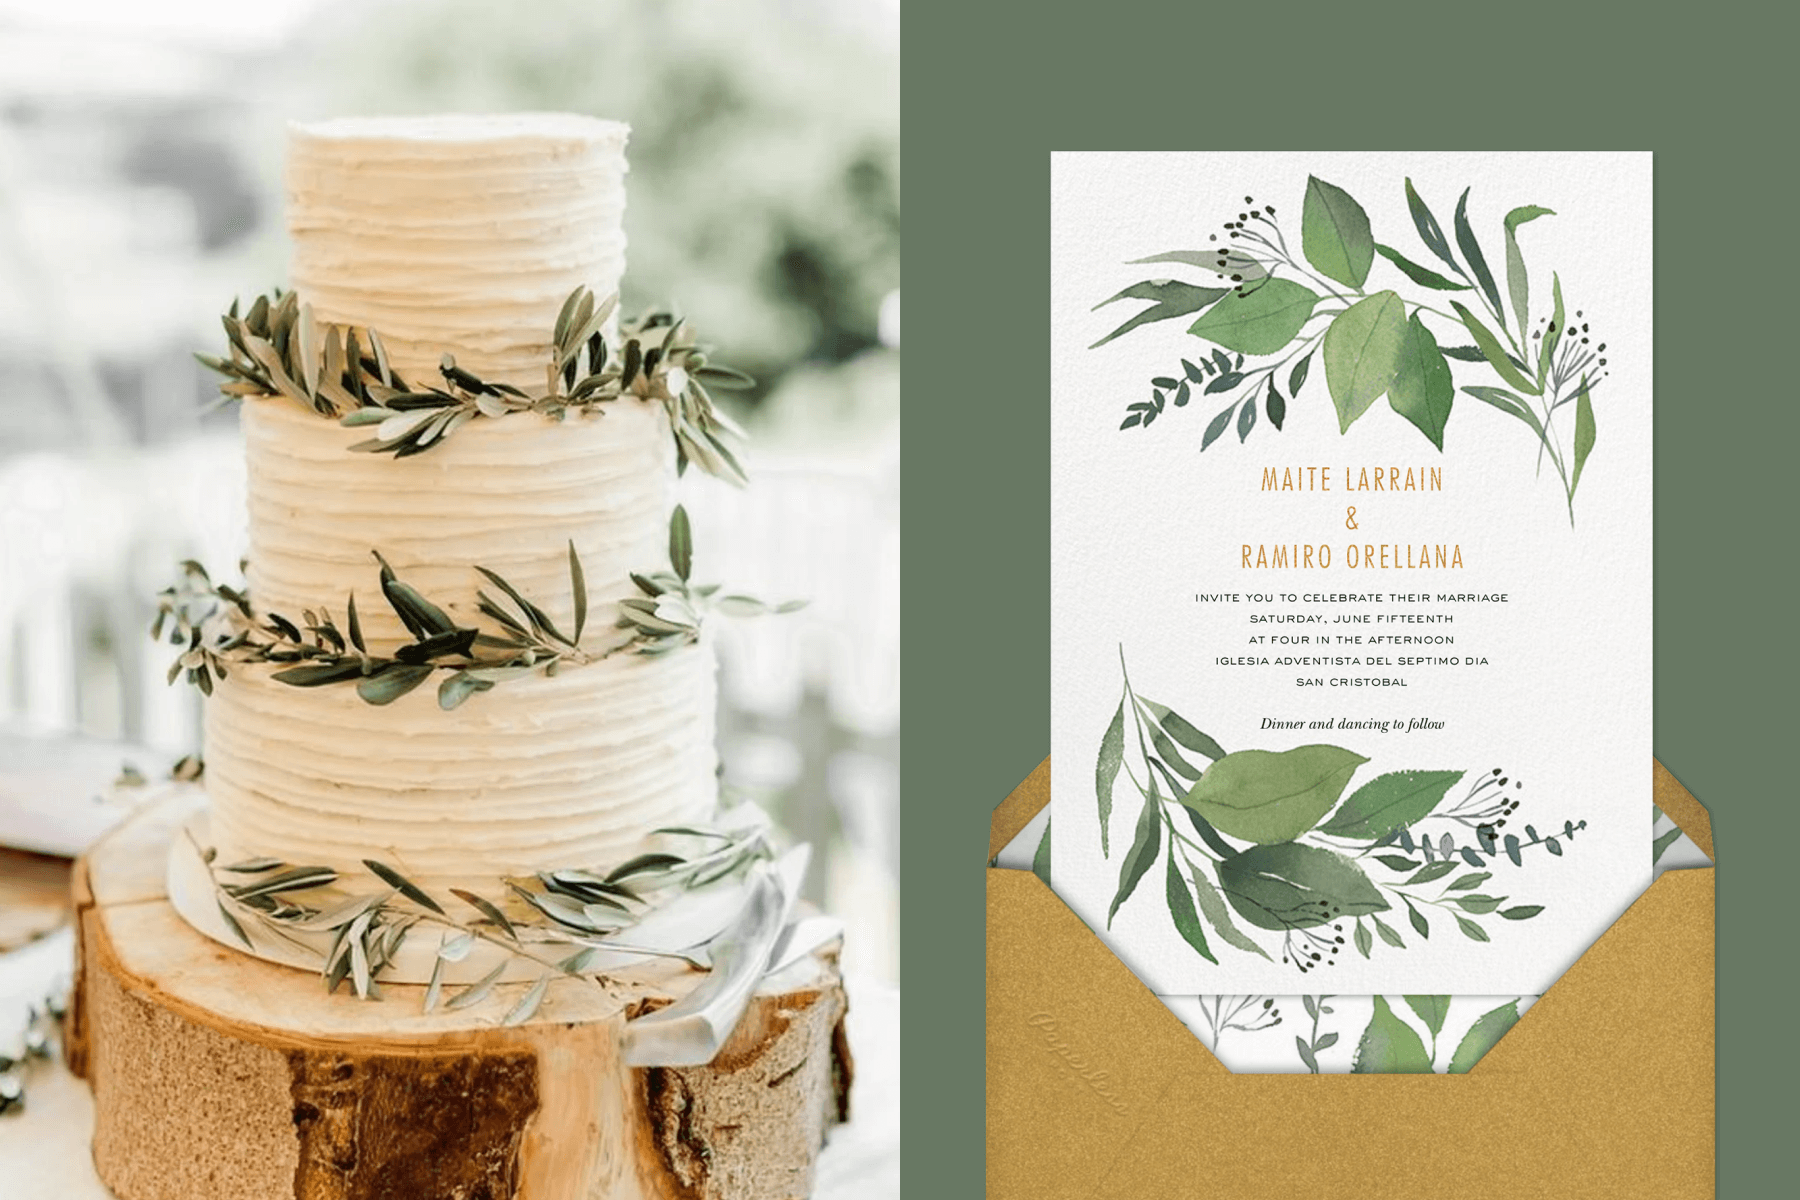 white three-tiered wedding cake decorated with olive branches. Right: A wedding invitation with green watercolor leaves